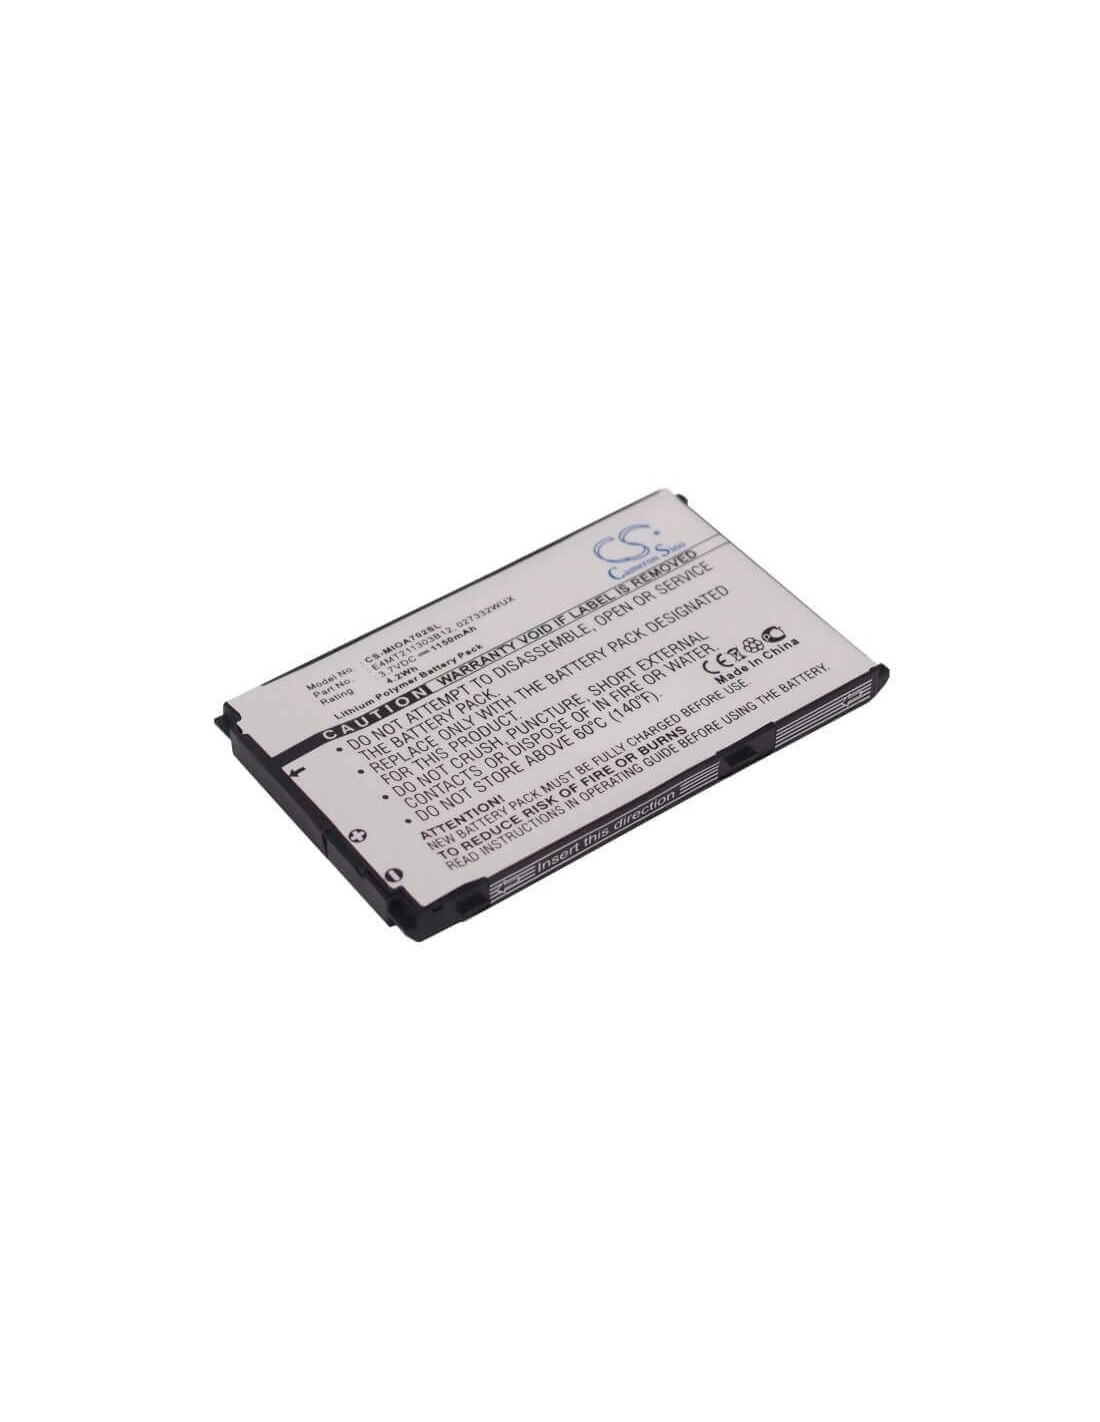 Battery for Mitac Mio A702 3.7V, 1150mAh - 4.26Wh